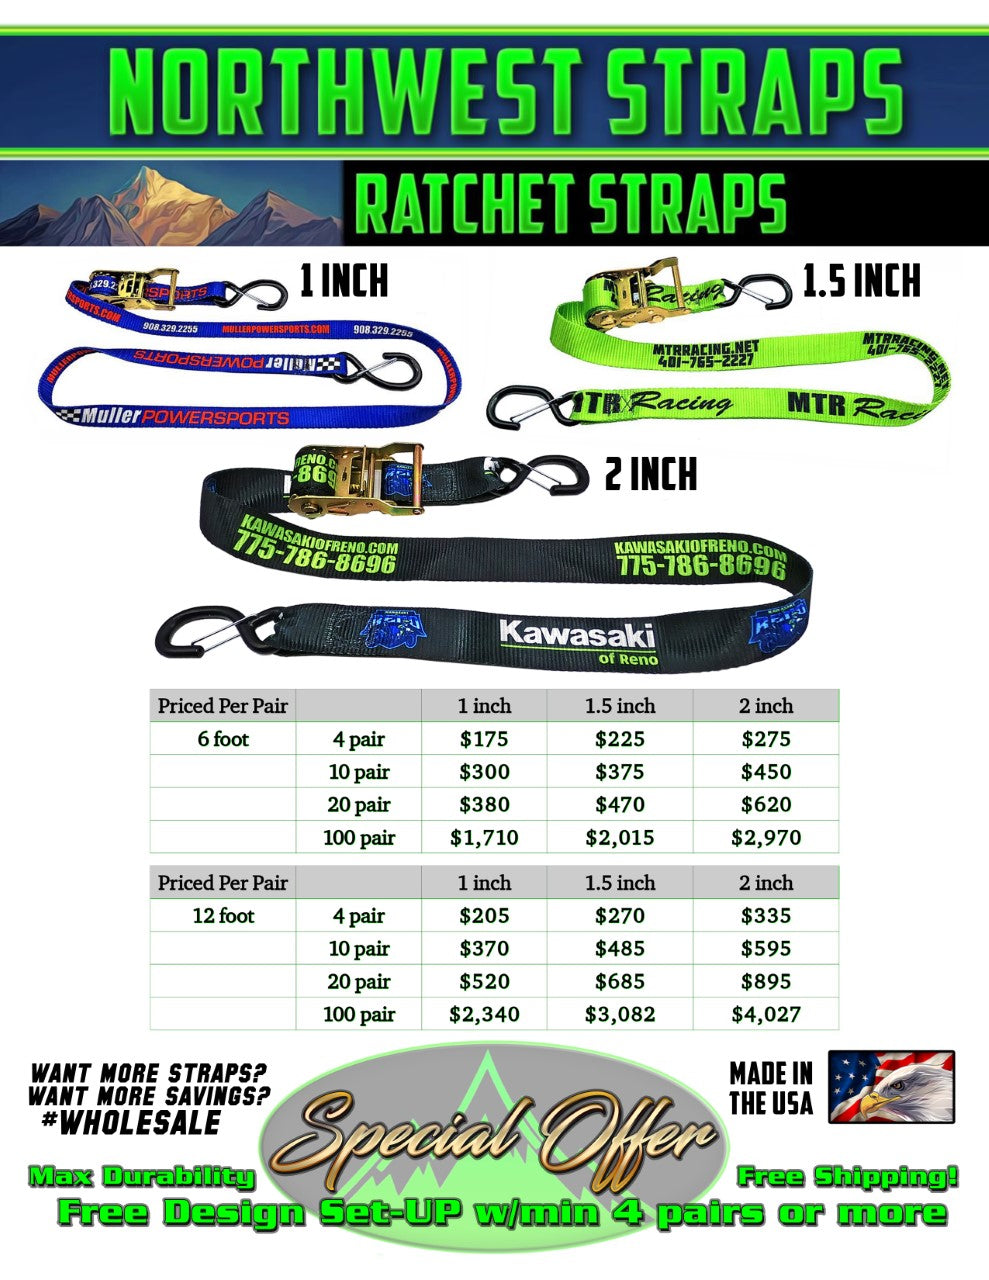 Our American-Made Ratchet Straps Are A Super Hero for Your Business